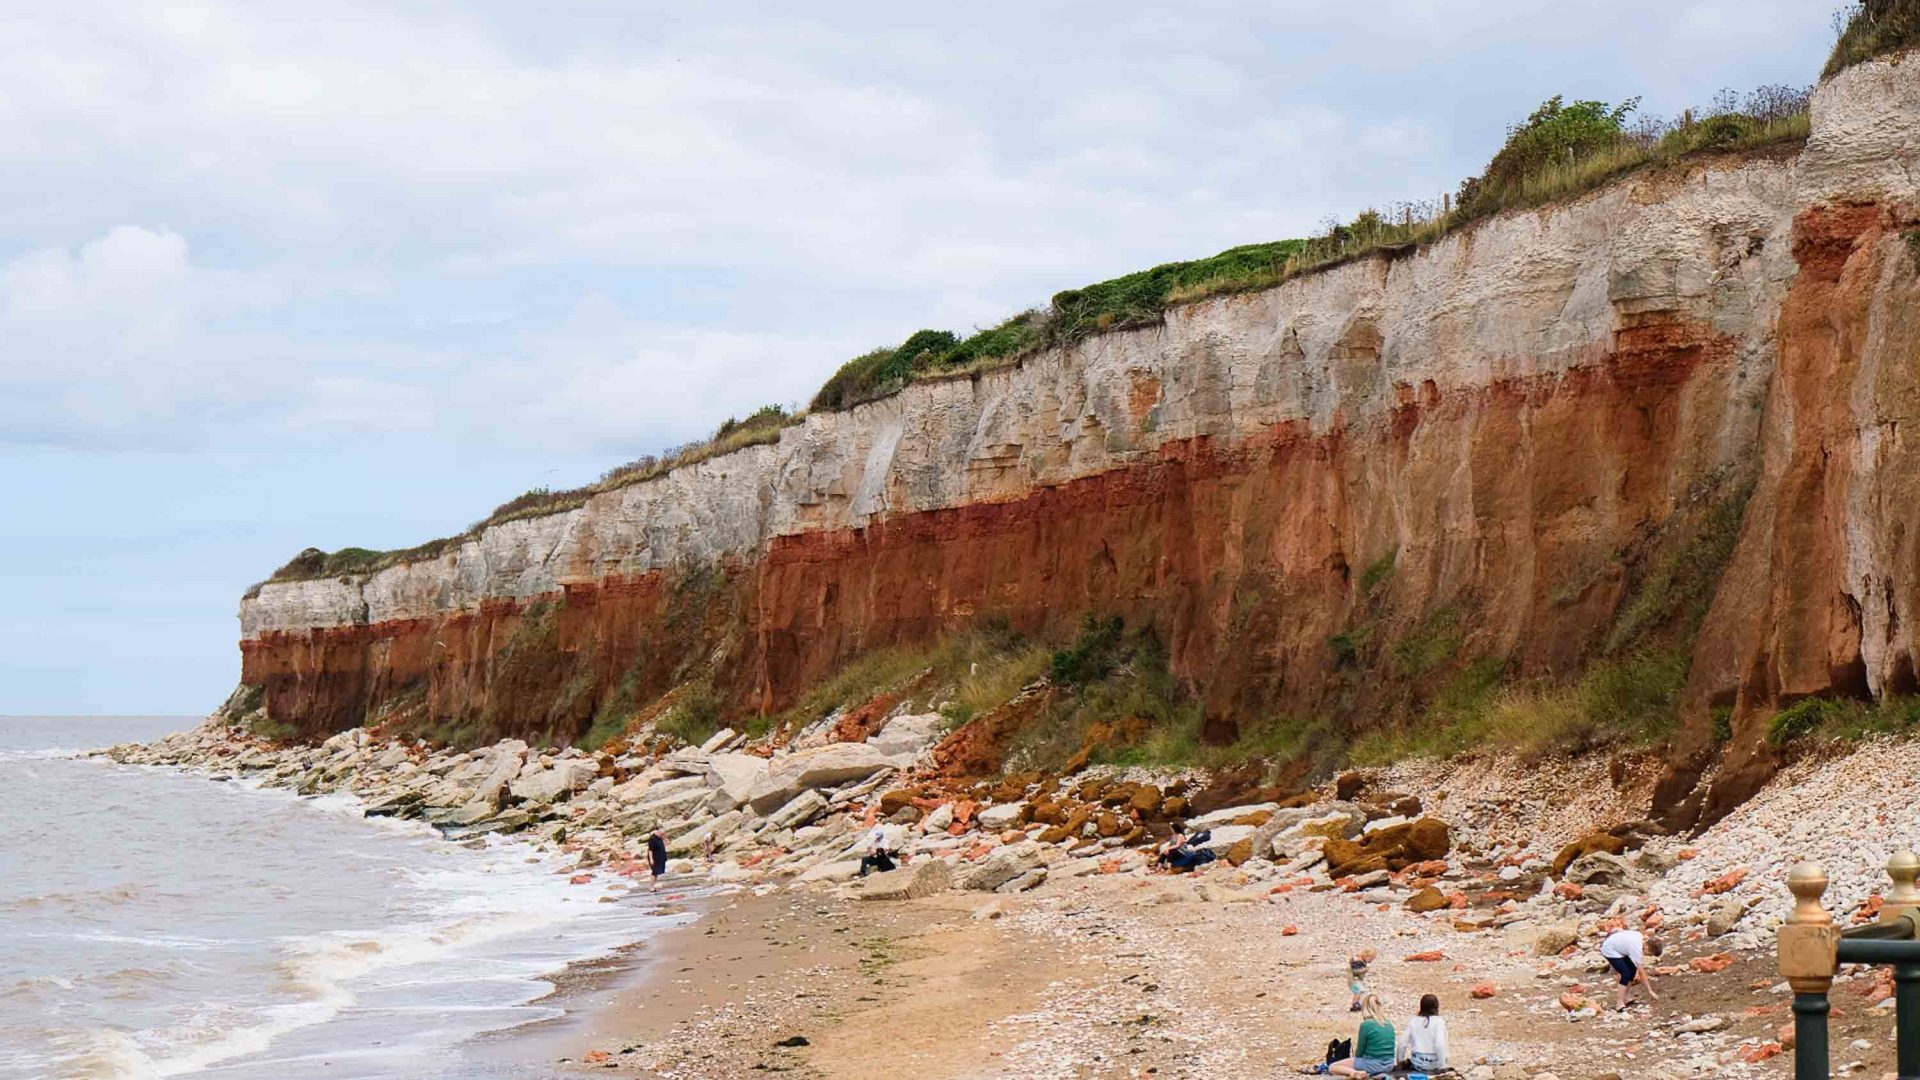 Red earth cliff face meets the ocean. A small gathering of people sit on the sand.